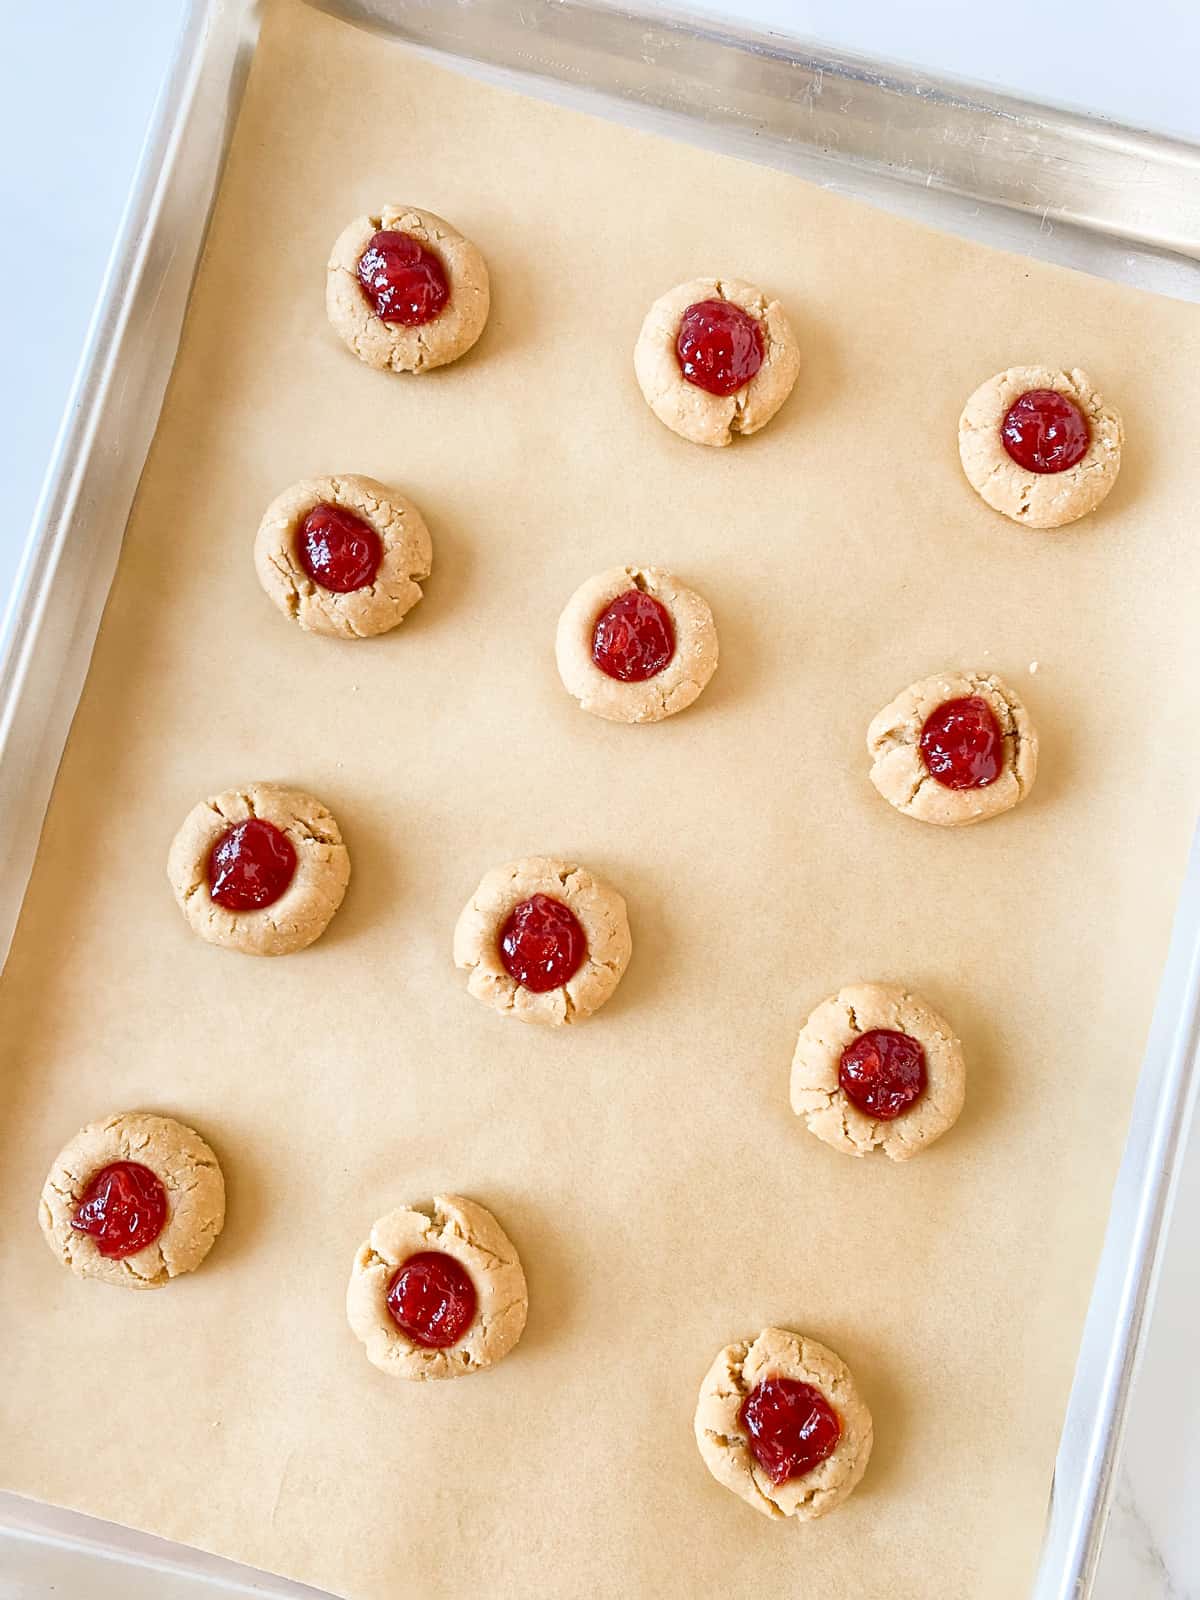 Unbaked cookies filled with jam.